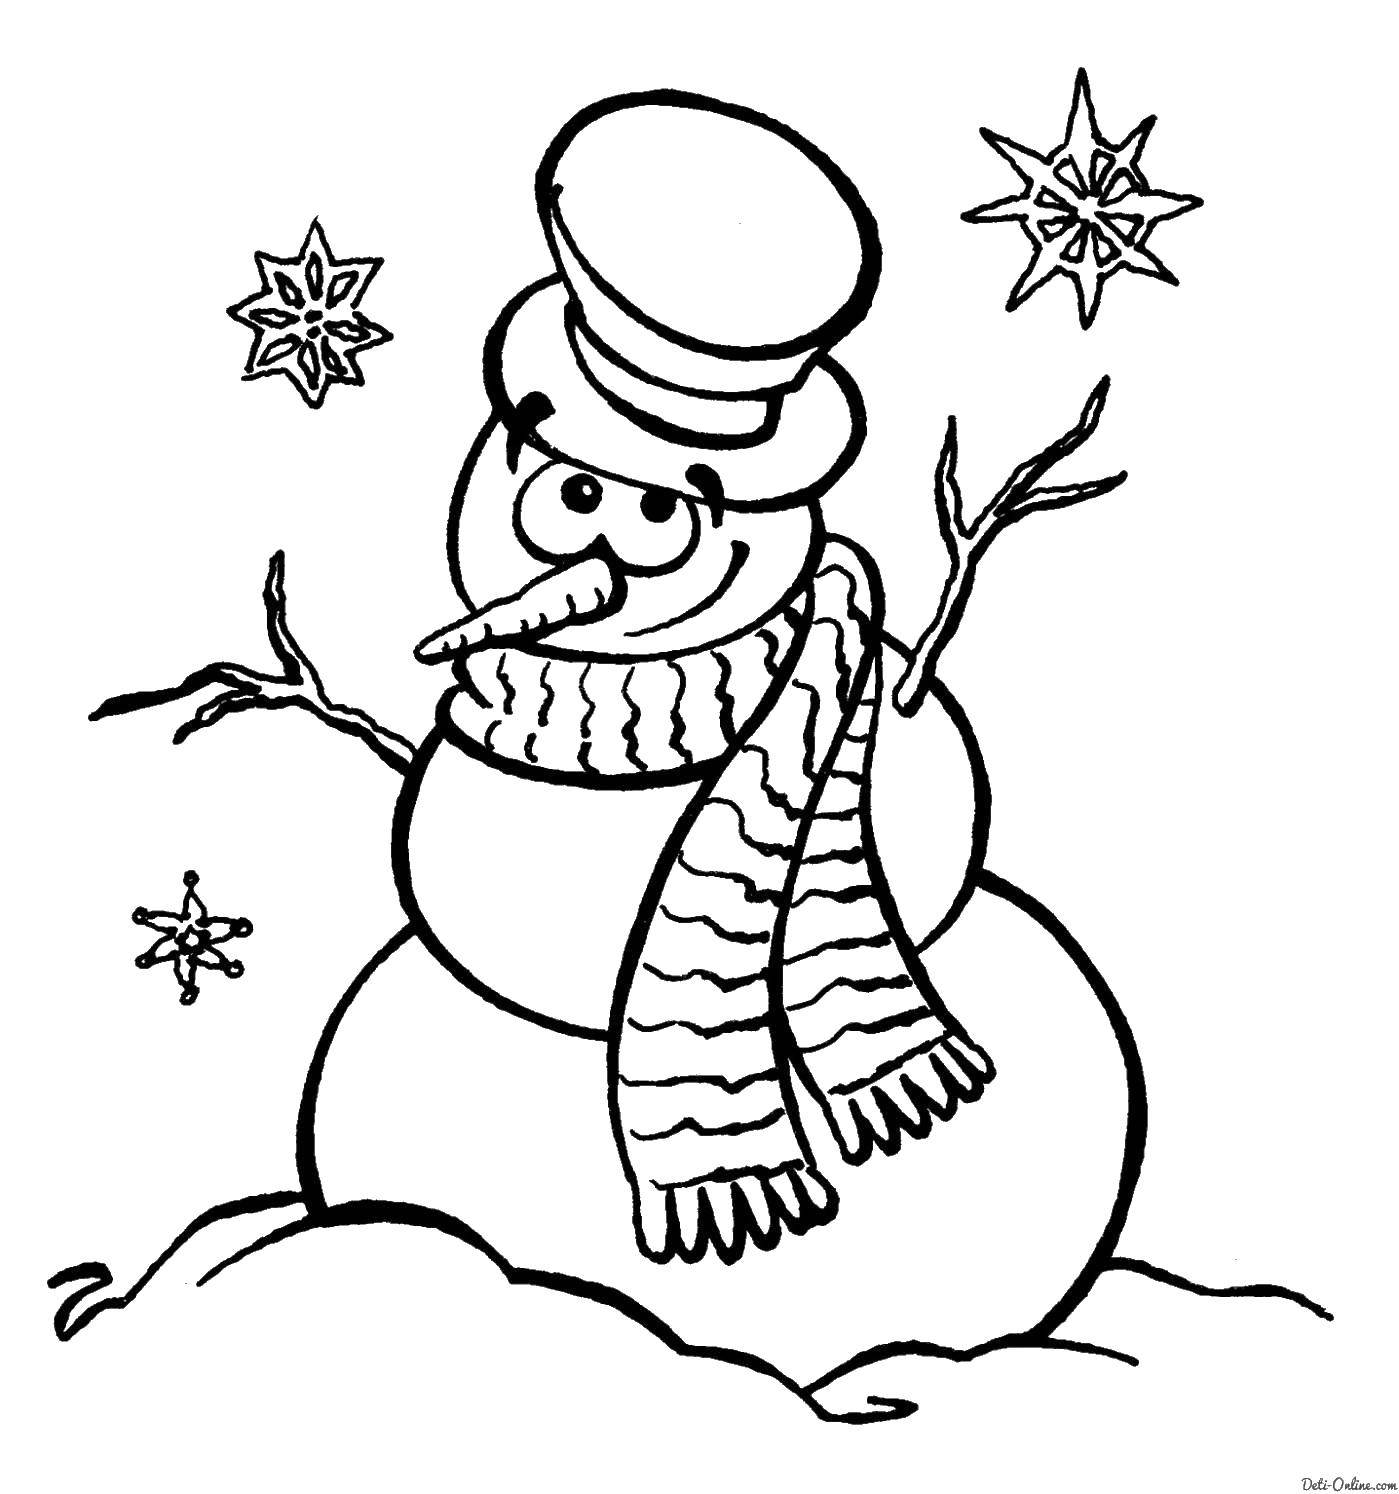 Coloring Snowman with scarf. Category snowman. Tags:  scarf, snowman.